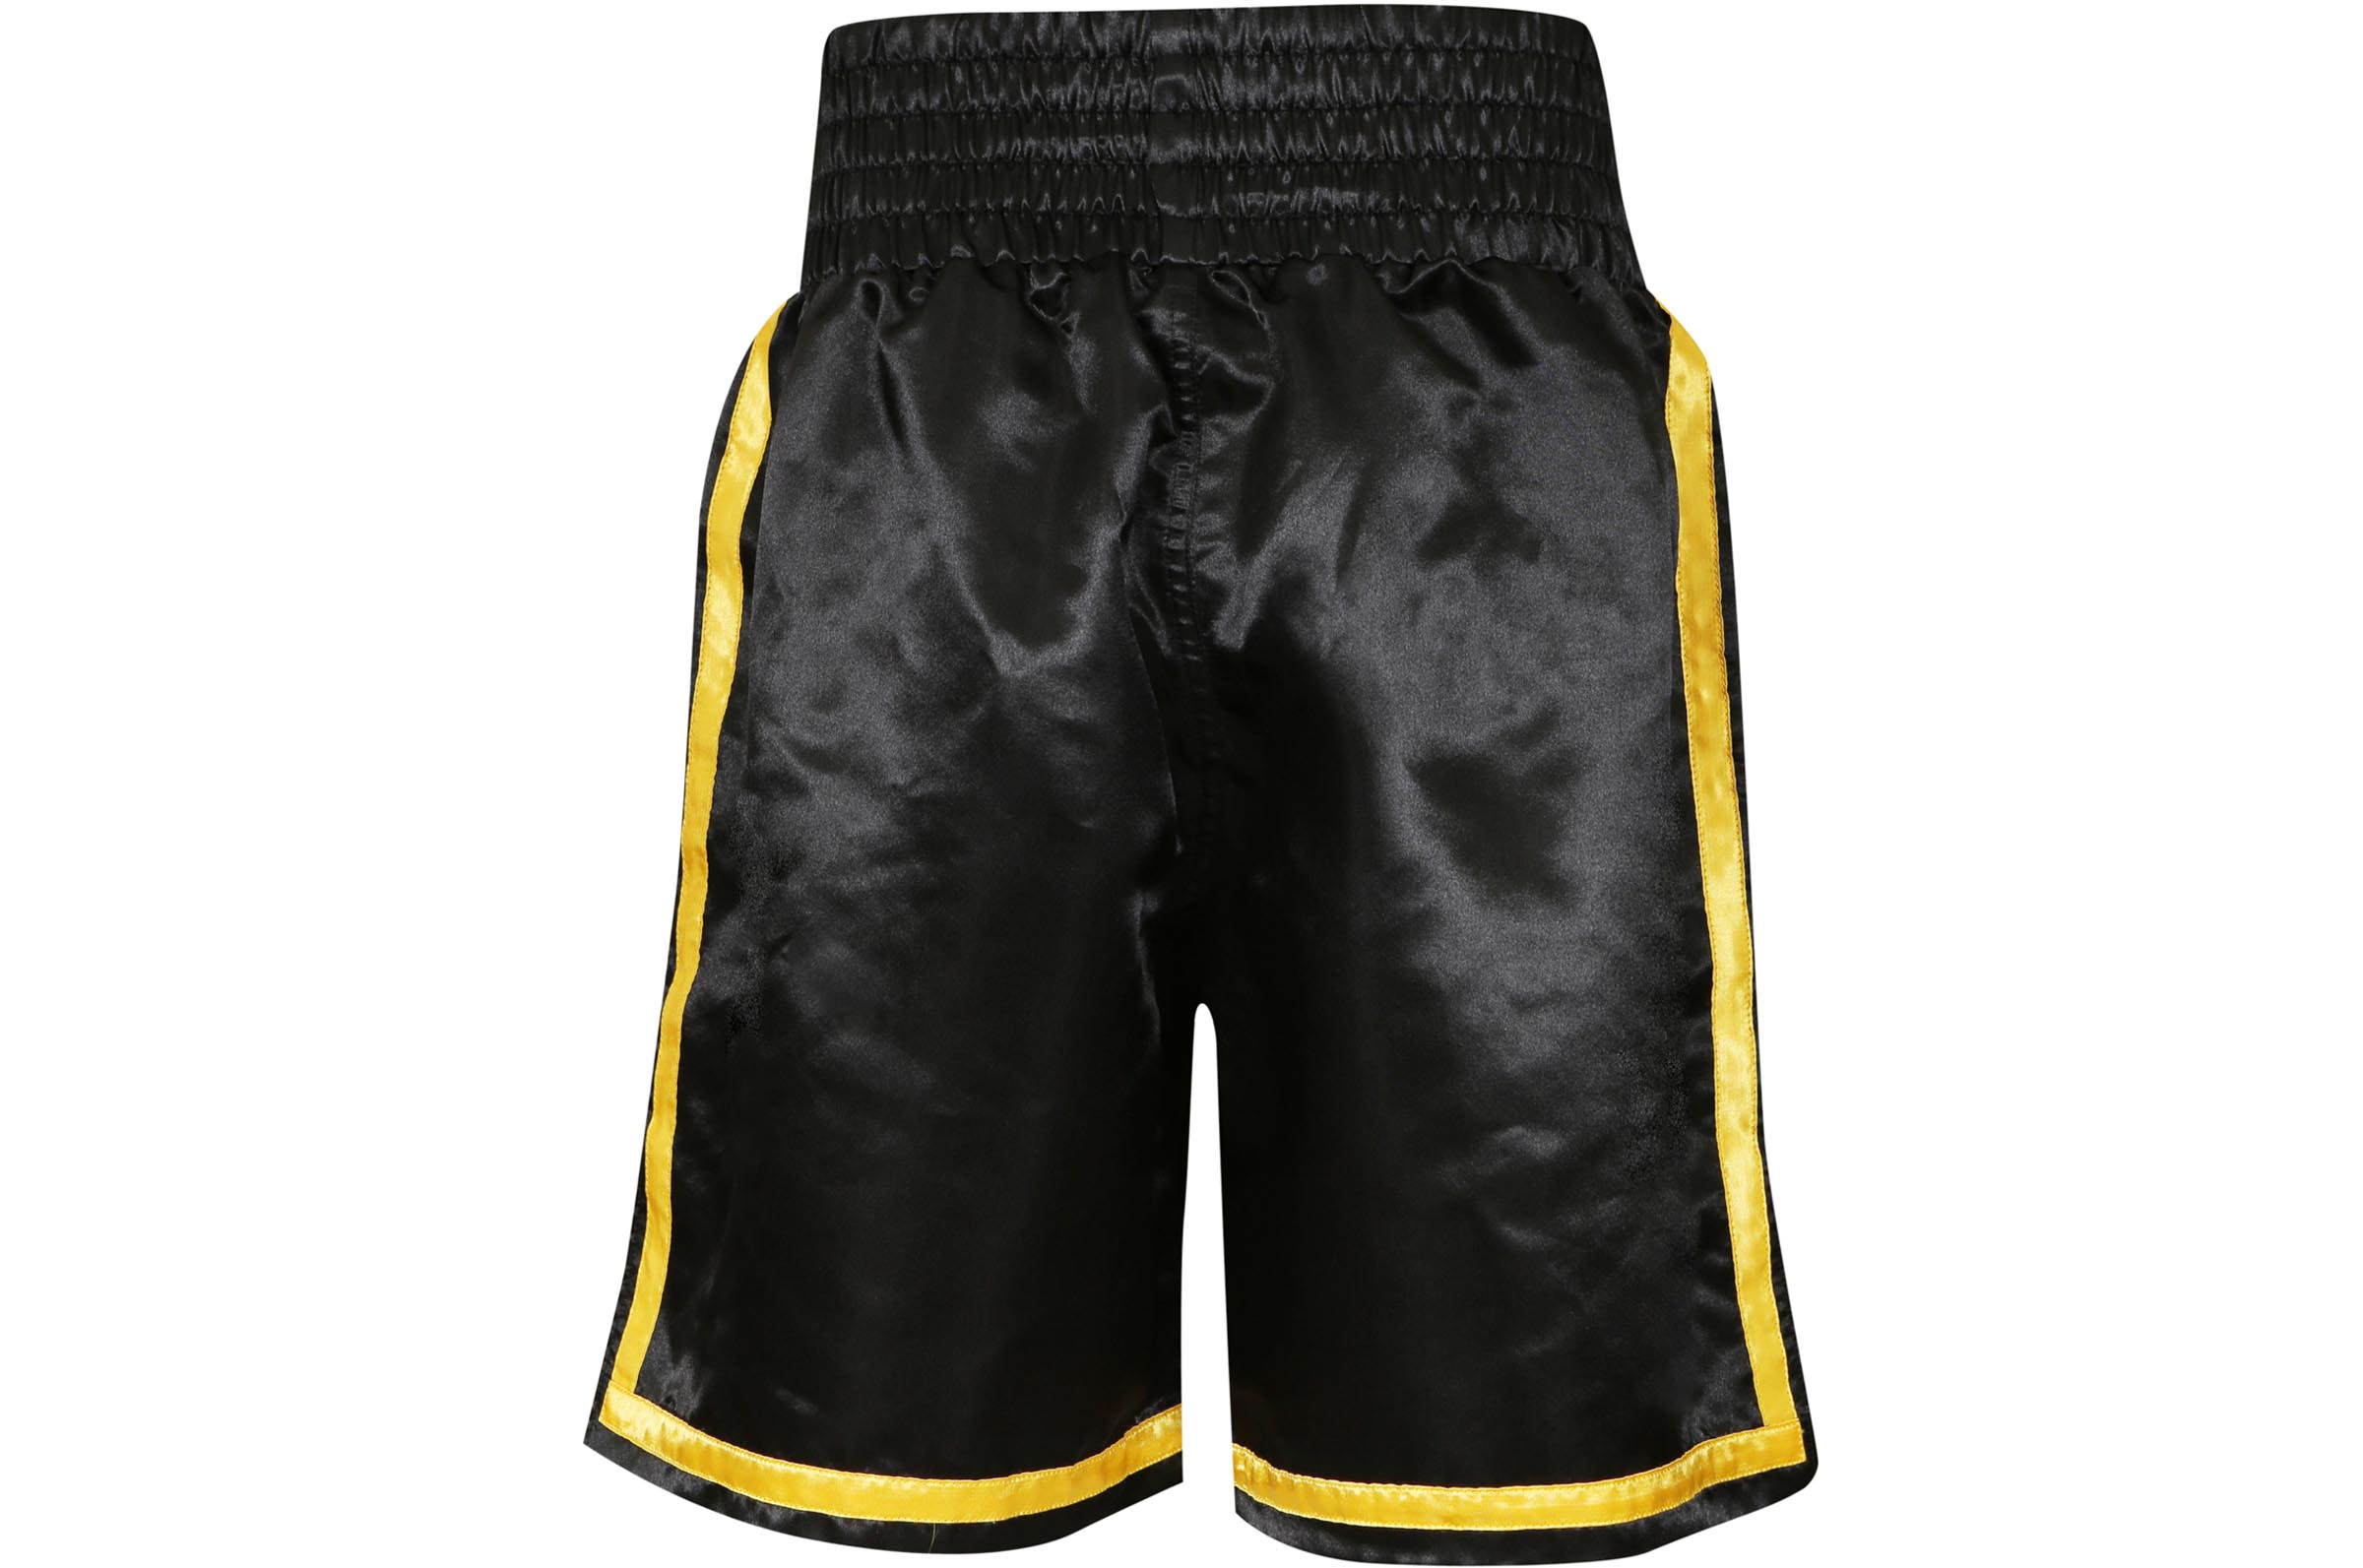 Competition boxing shorts - Sport performance, Everlast -